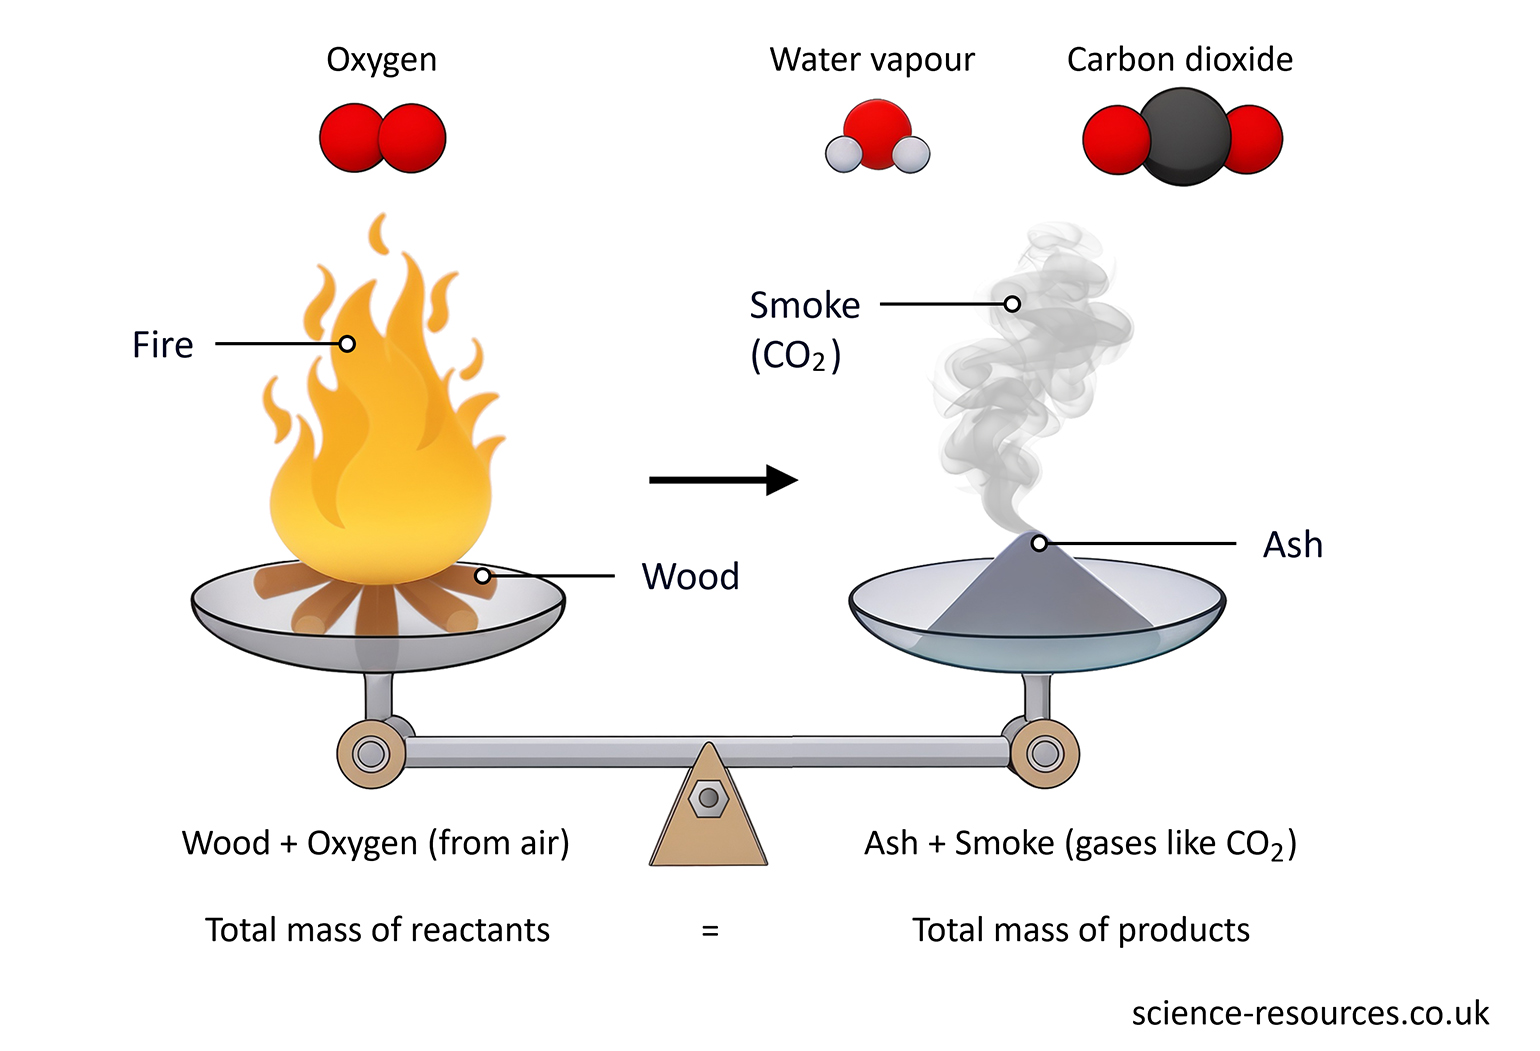 This image is a diagram that explains how the principle of conservation of mass applies to the example of wood burning. It shows that the total mass of wood and oxygen before the reaction is equal to the total mass of ash and smoke after the reaction. The image also shows the chemical composition of the reactants and products, such as water vapour and carbon dioxide. 